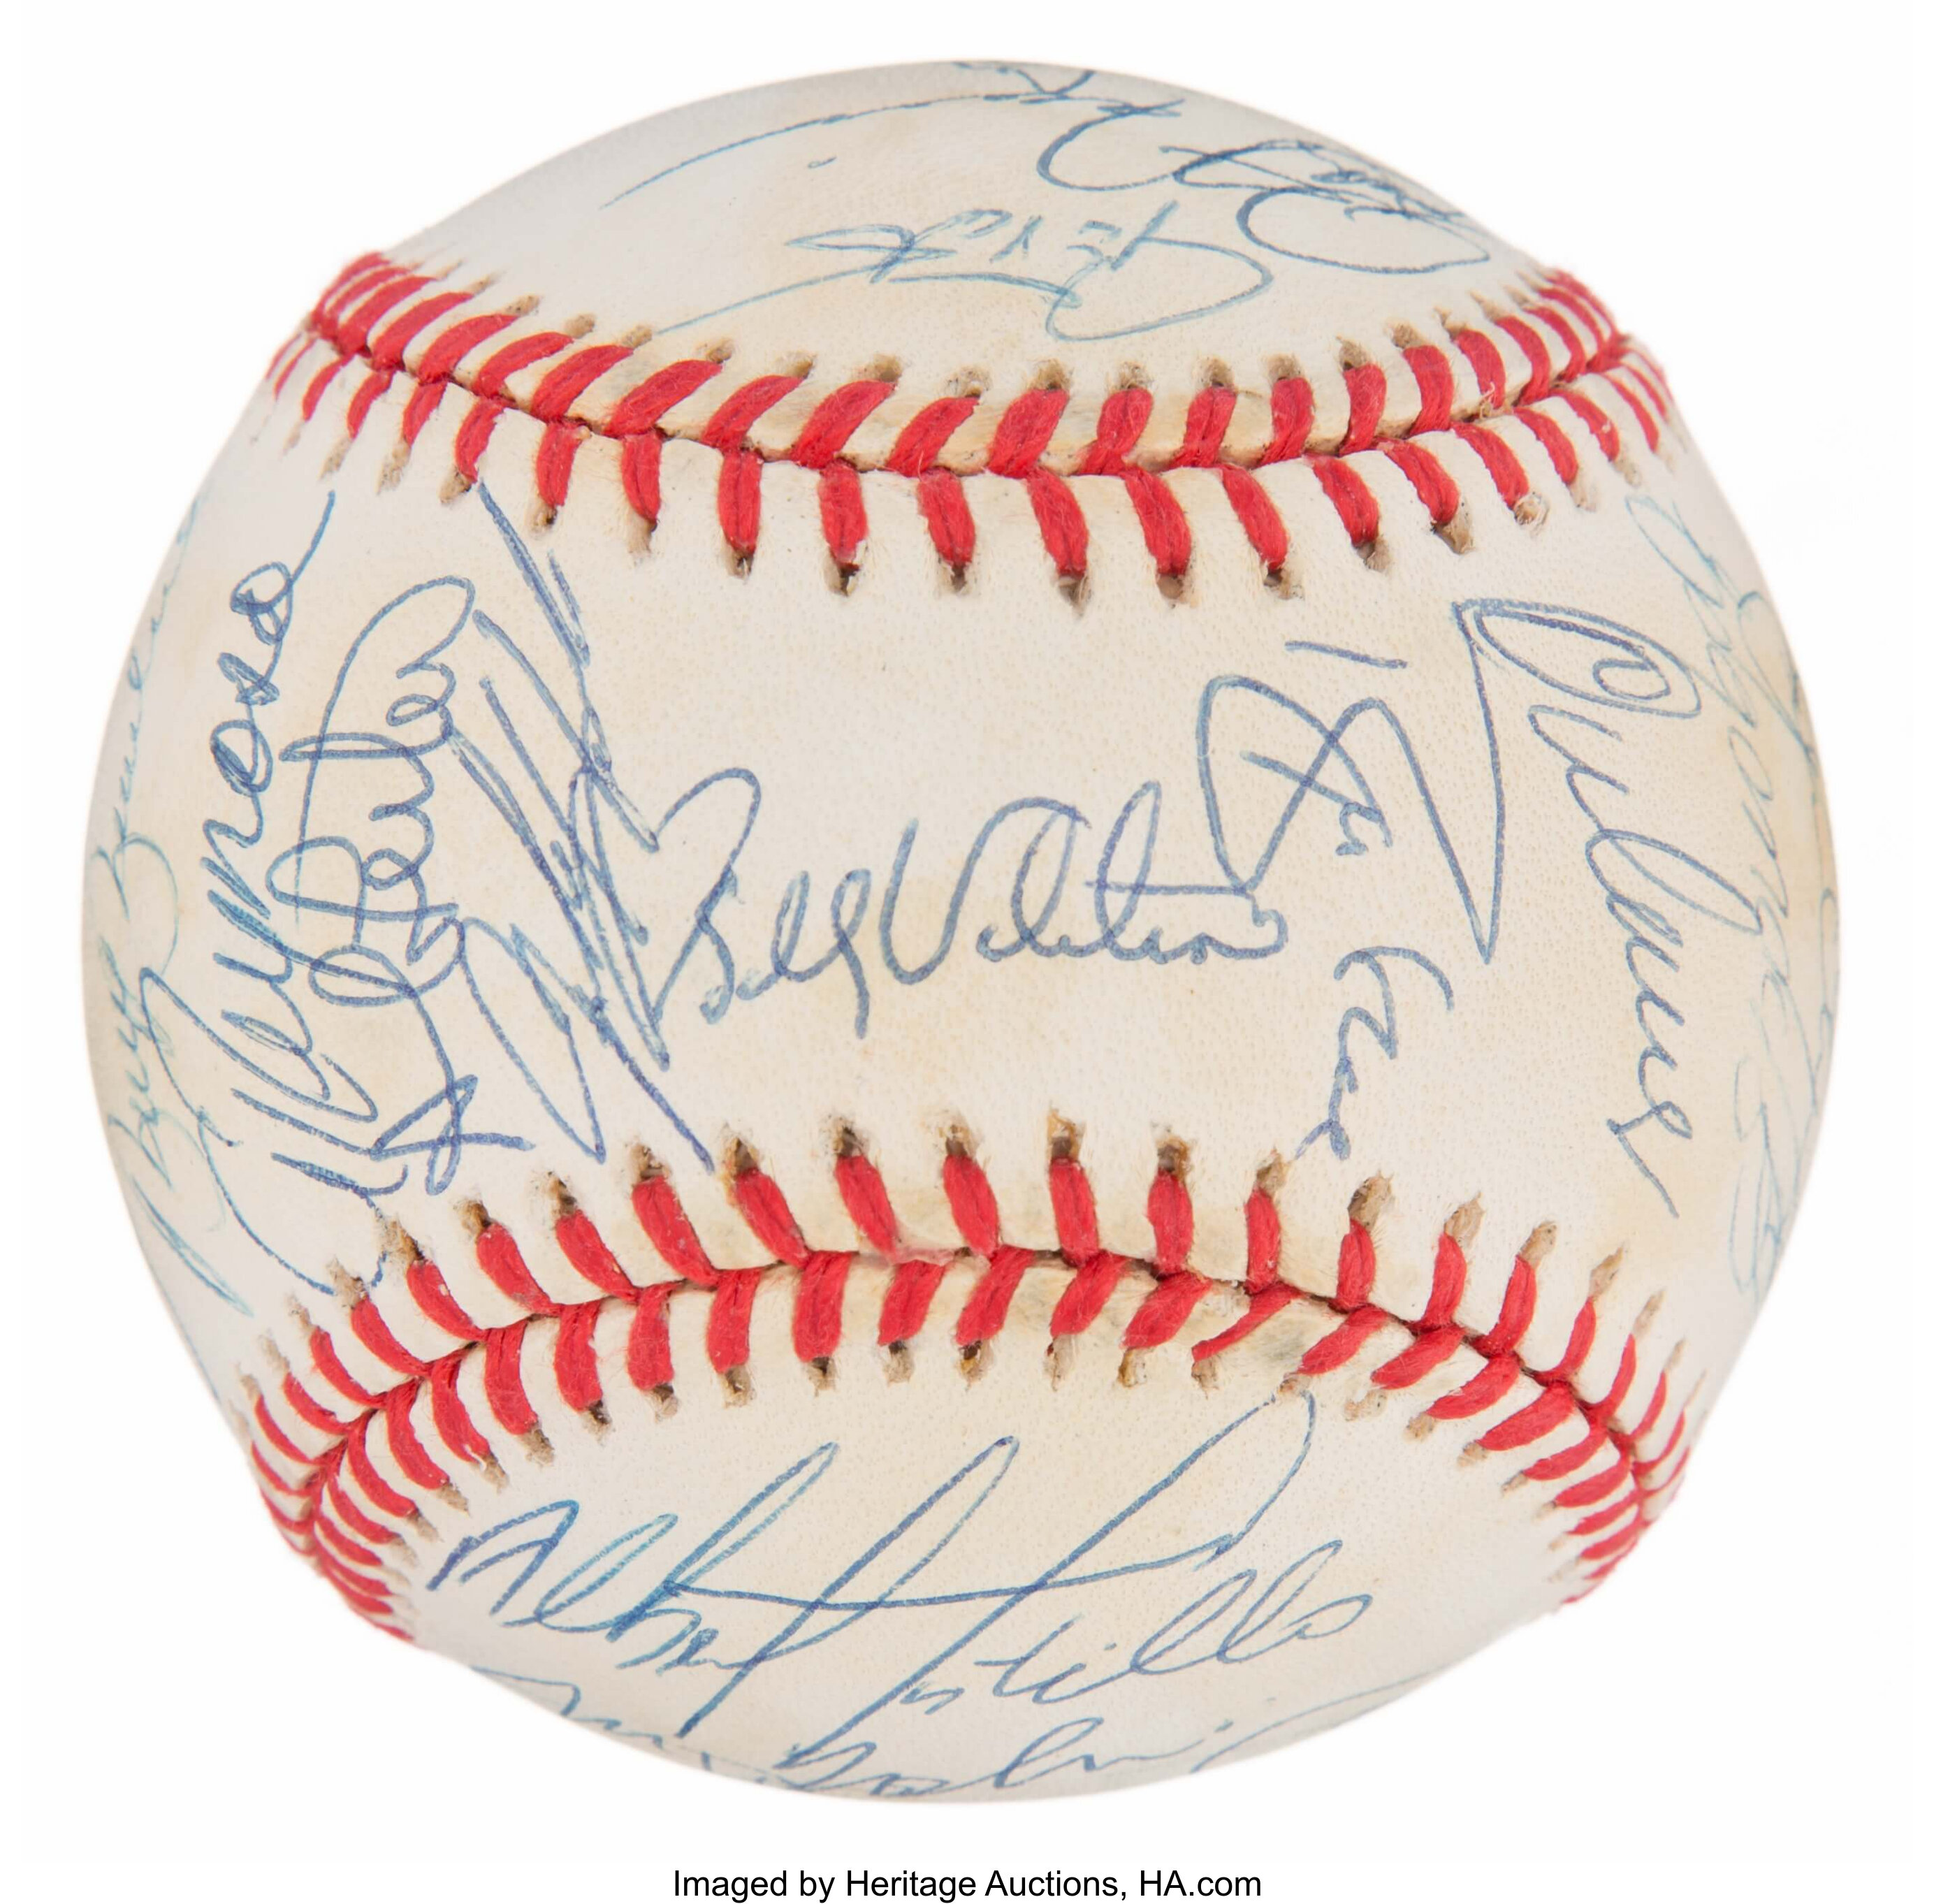 MLB New York Mets Autographs to Choose From Mookie Wilson 